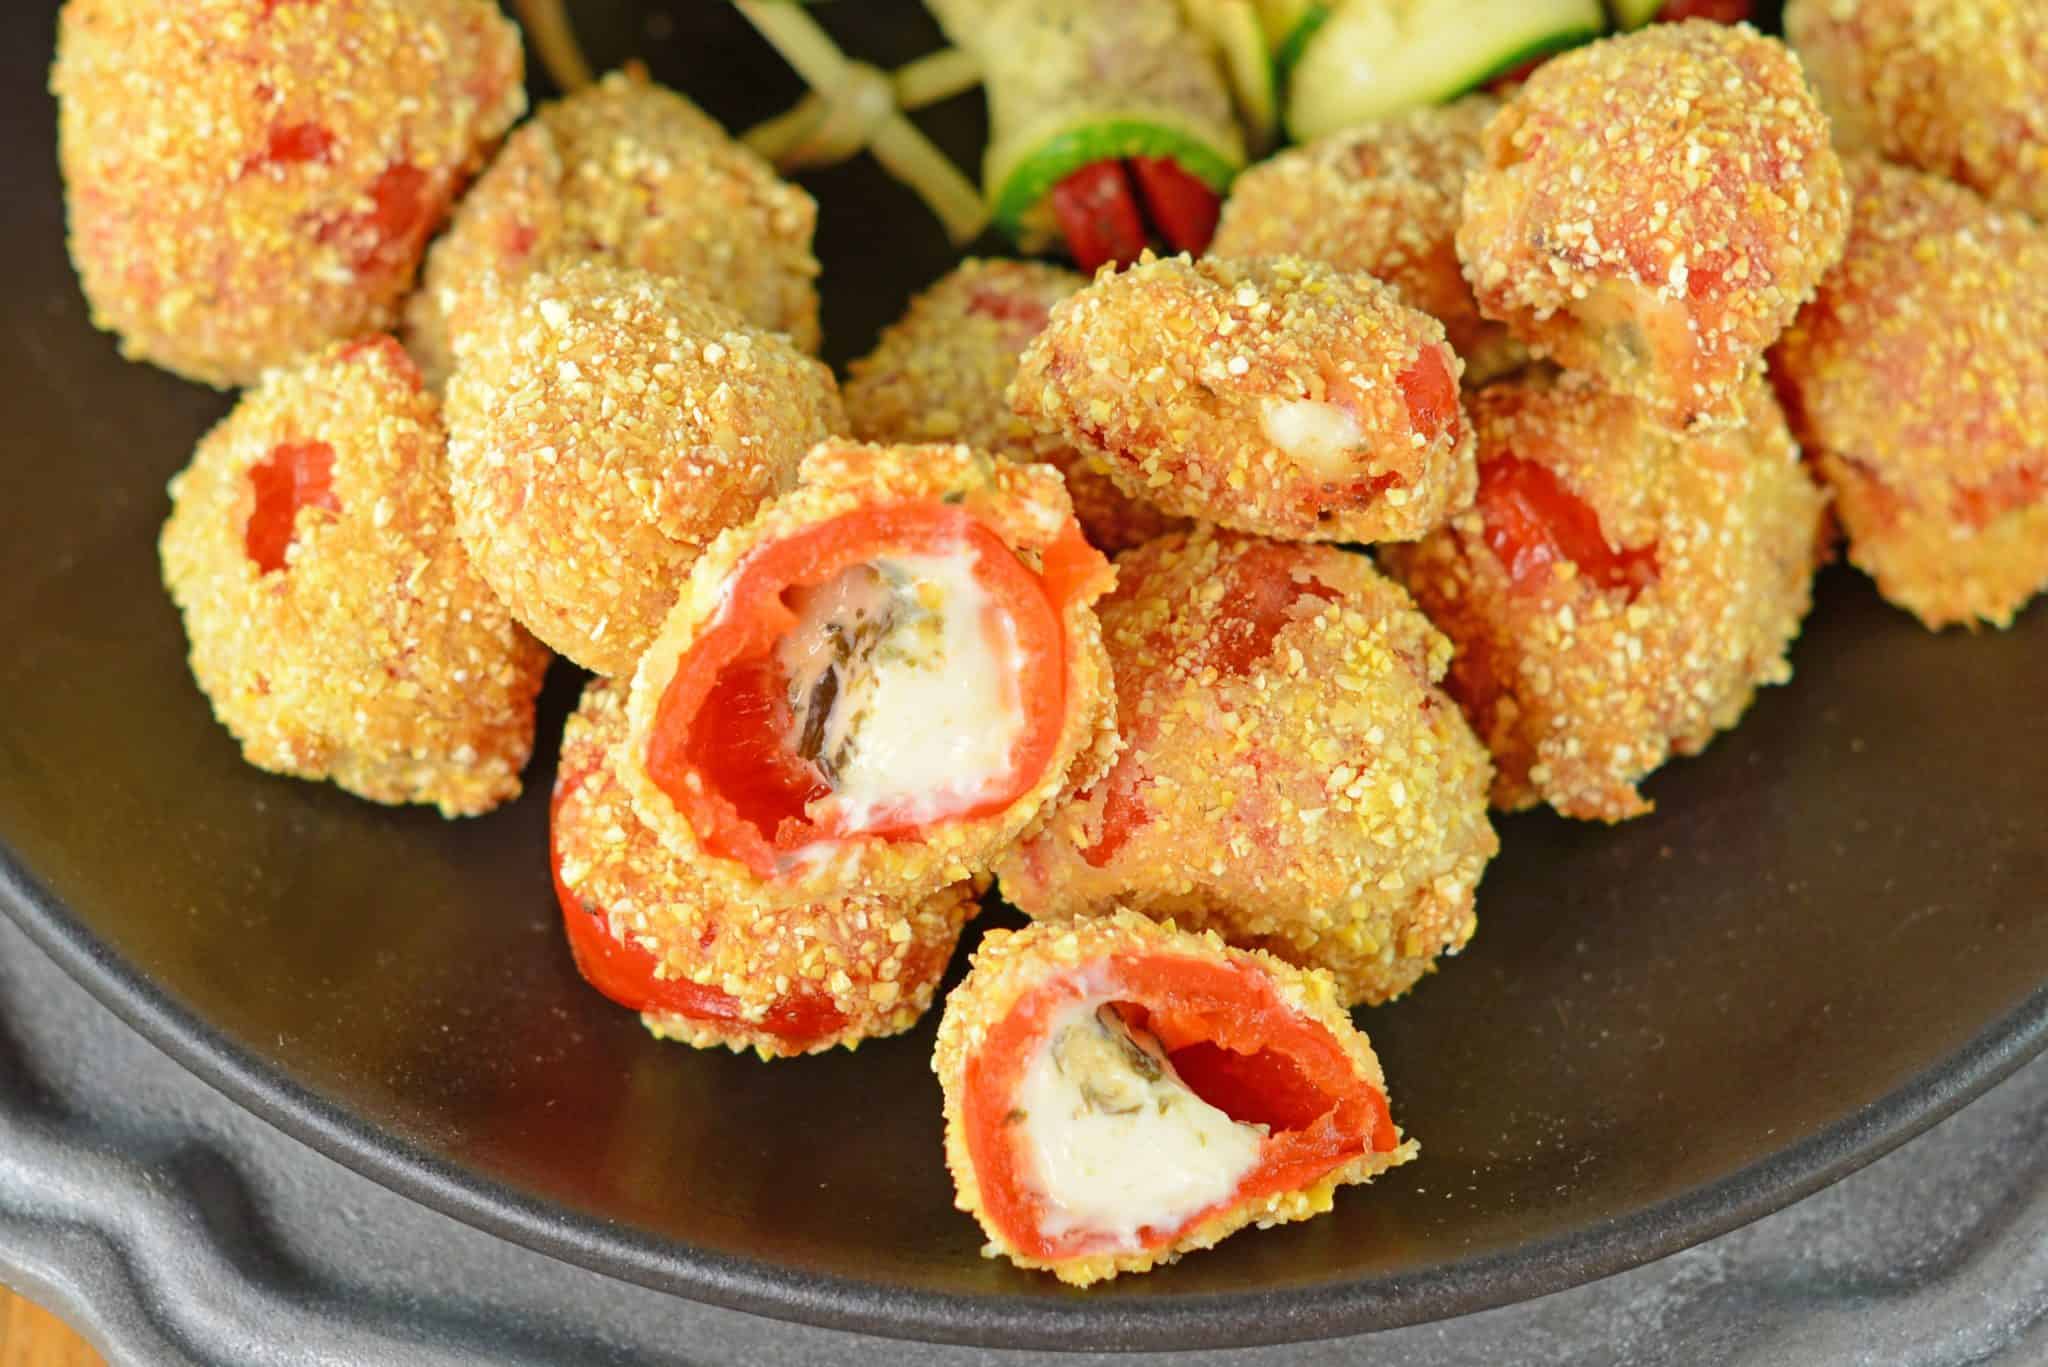 Sweet peppadew peppers stuffed with tangy goat cheese, tossed in cornmeal and then lightly fried. Dip in a chipotle aioli, green goddess or honey mustard sauce.